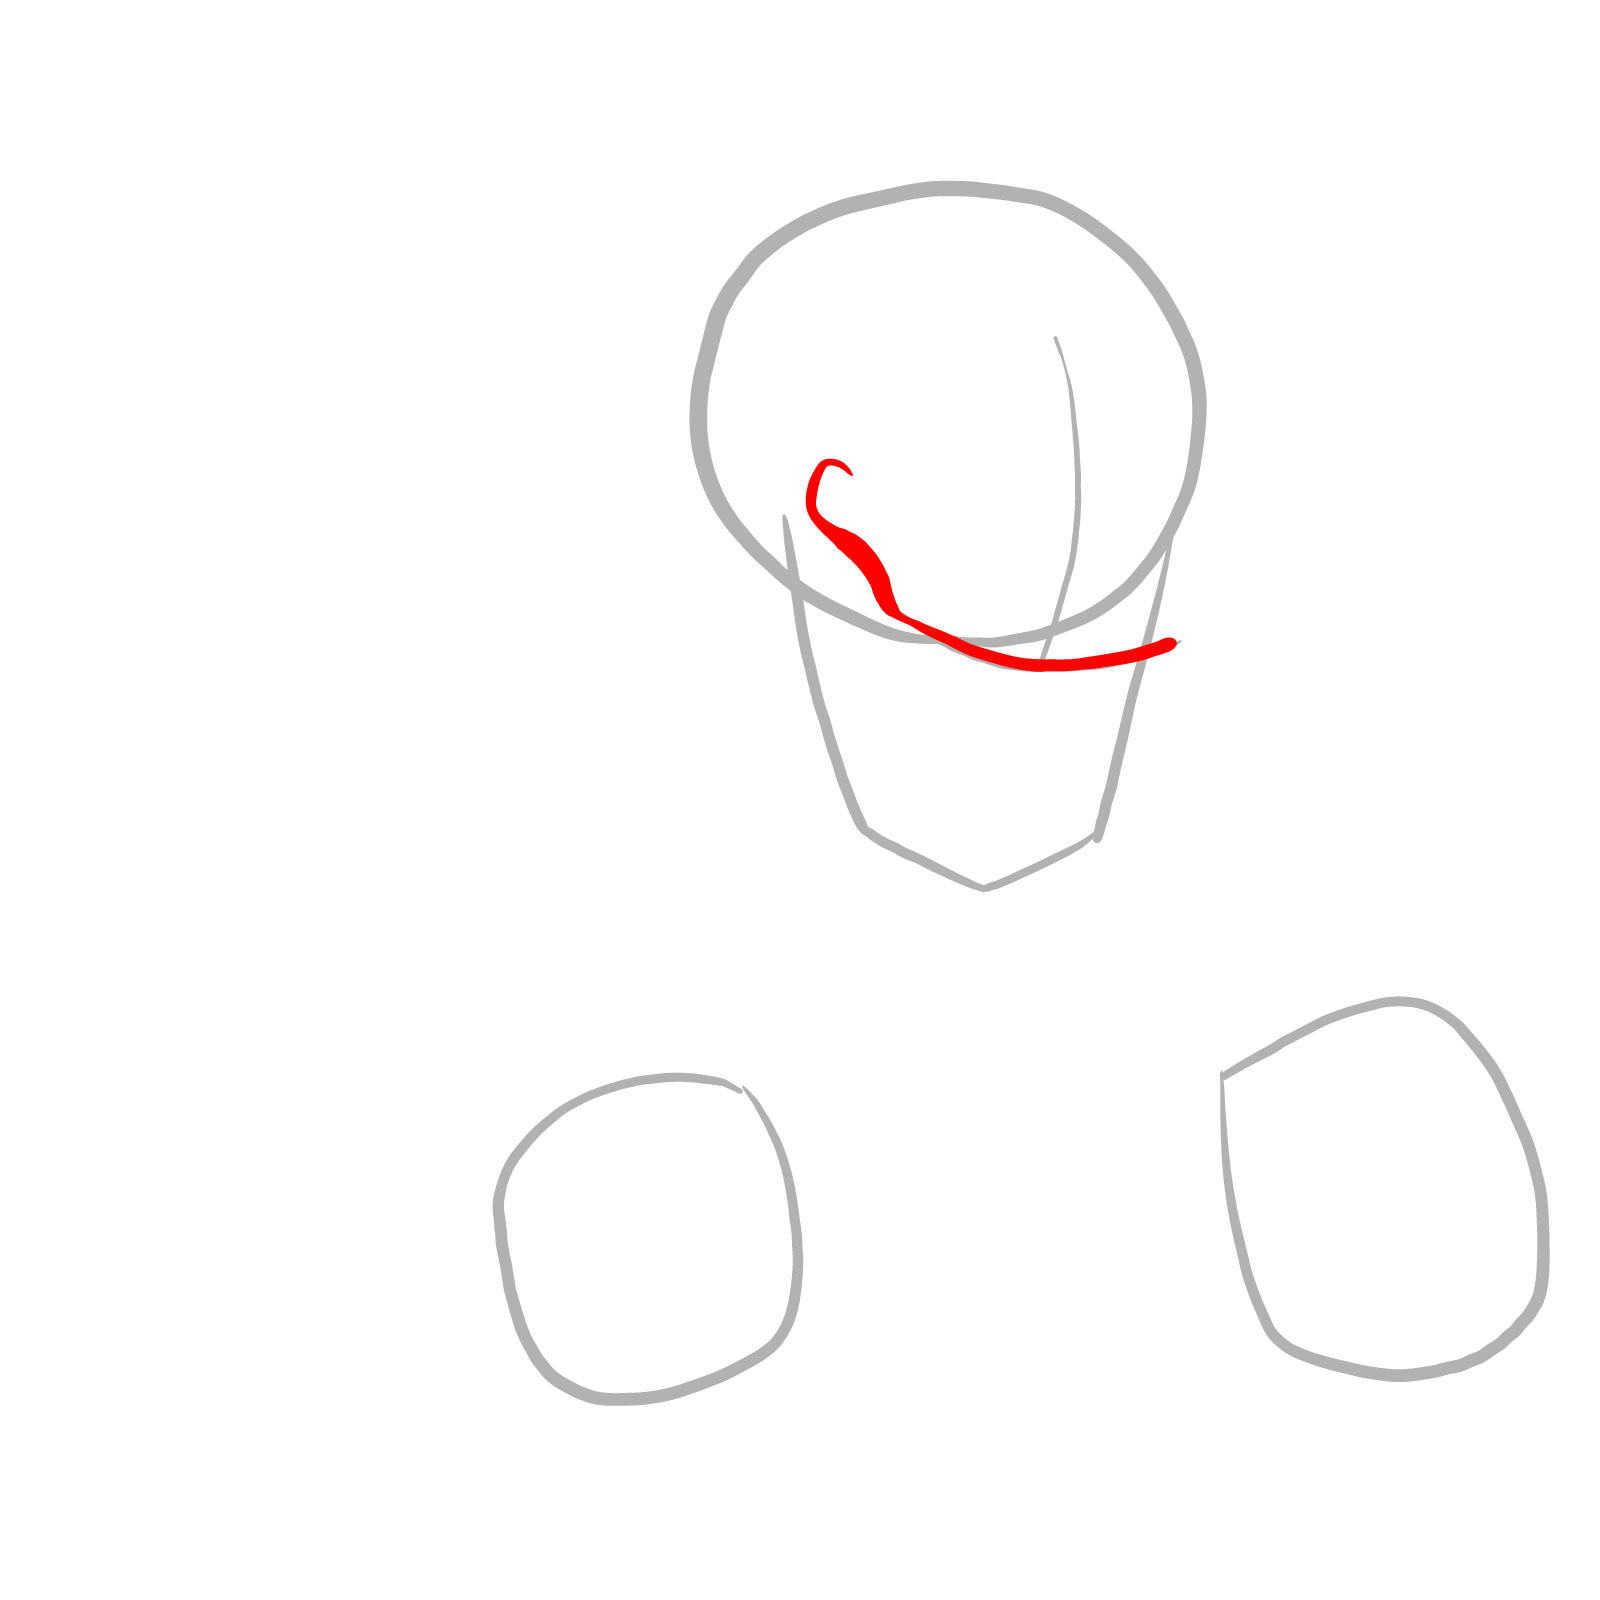 How to draw Phantom!Papyrus from FNF - step 03